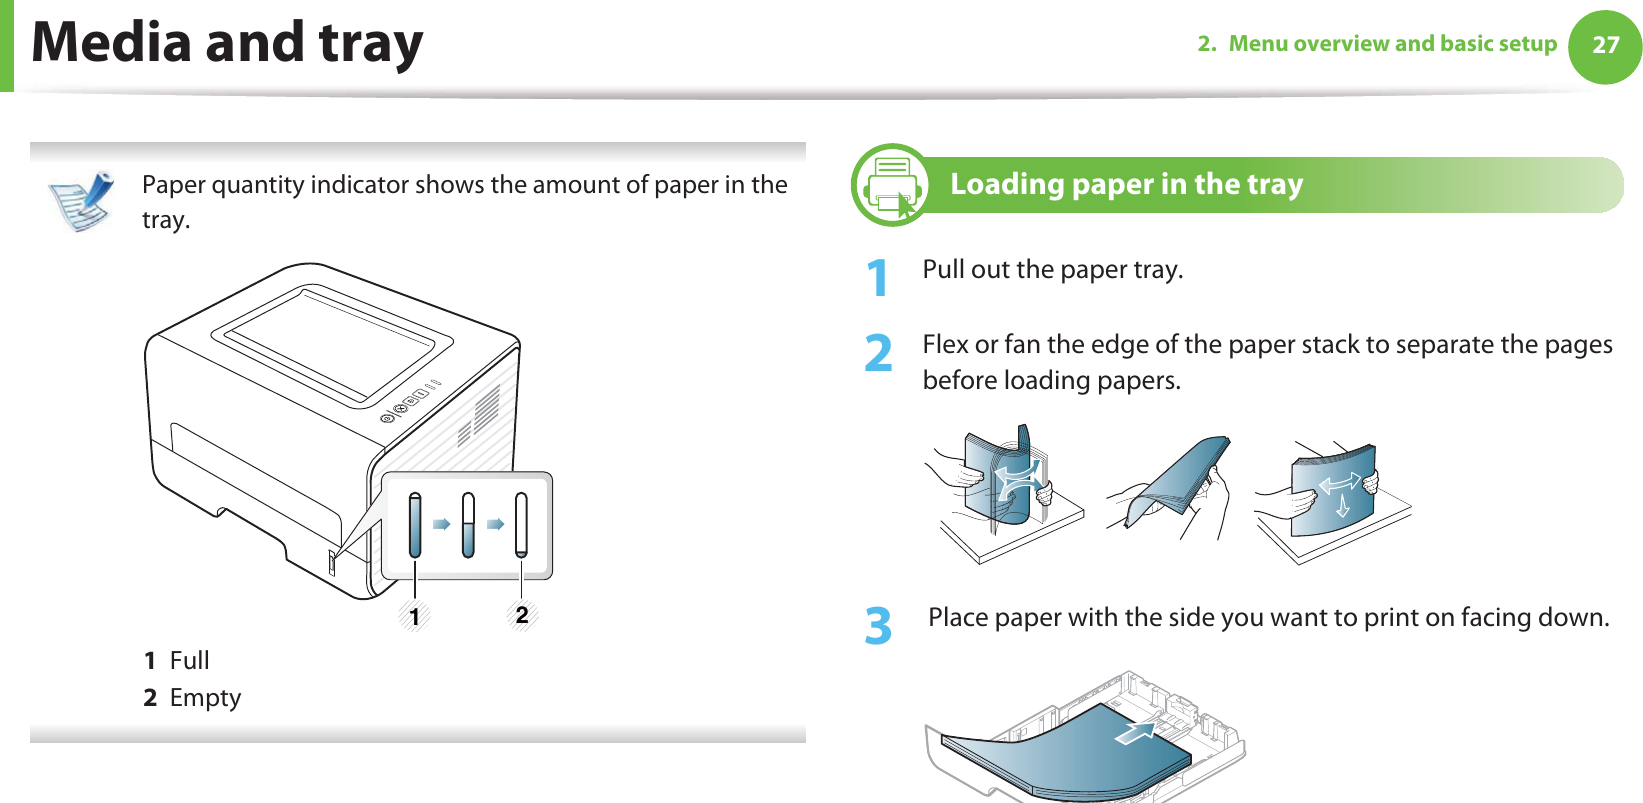 Media and tray 272. Menu overview and basic setup Paper quantity indicator shows the amount of paper in the tray. 1  Full2  Empty 2 Loading paper in the tray1Pull out the paper tray.2  Flex or fan the edge of the paper stack to separate the pages before loading papers.3   Place paper with the side you want to print on facing down.1 2